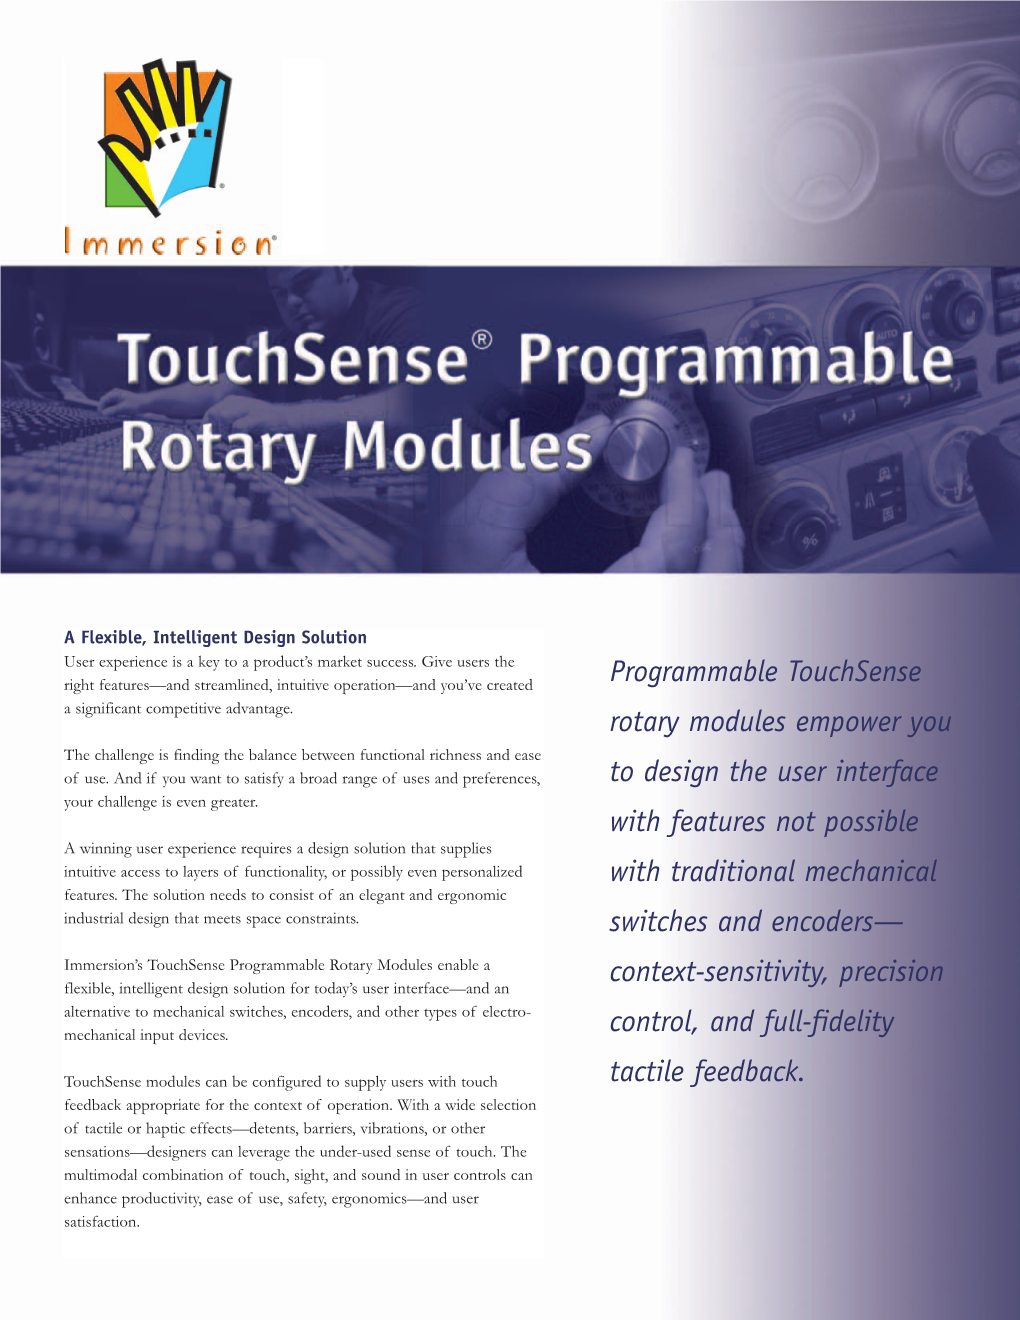 Programmable Touchsense Rotary Modules Empower You to Design the User Interface with Features Not Possible with Traditional Mech